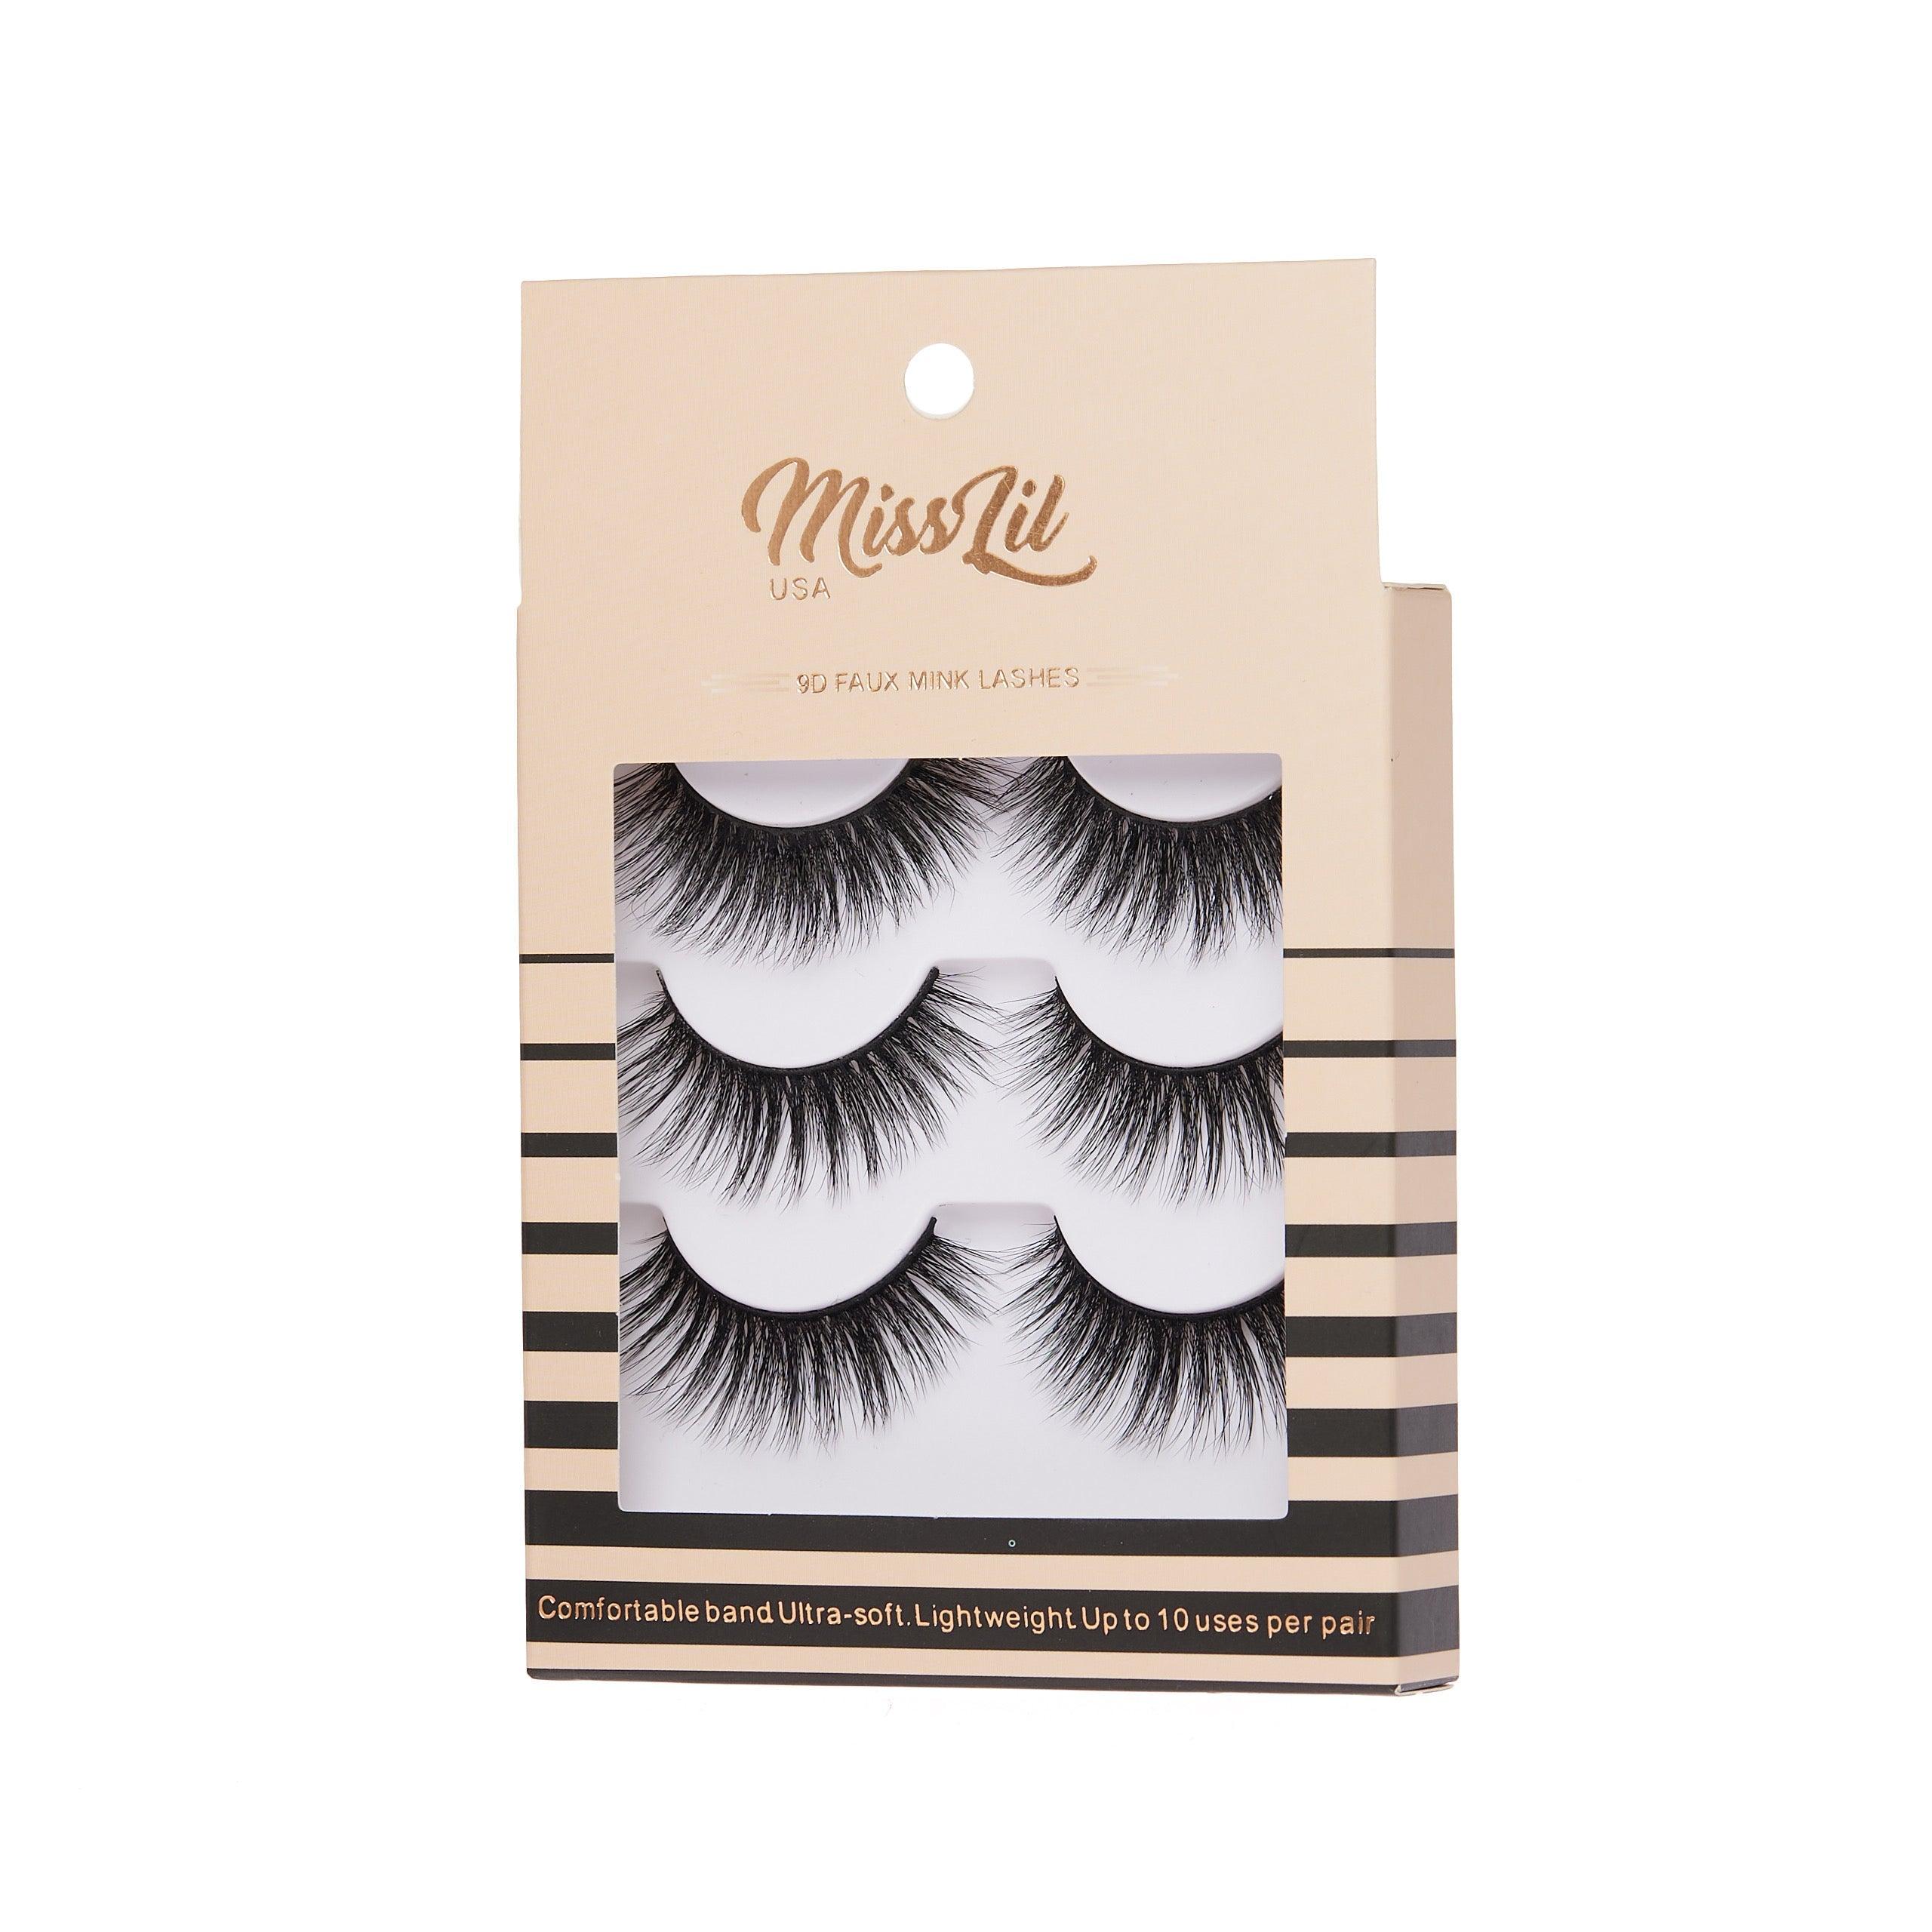 3-Pair Faux 9D Mink Eyelashes - Luxury Collection #28 - Pack of 12 - Miss Lil USA